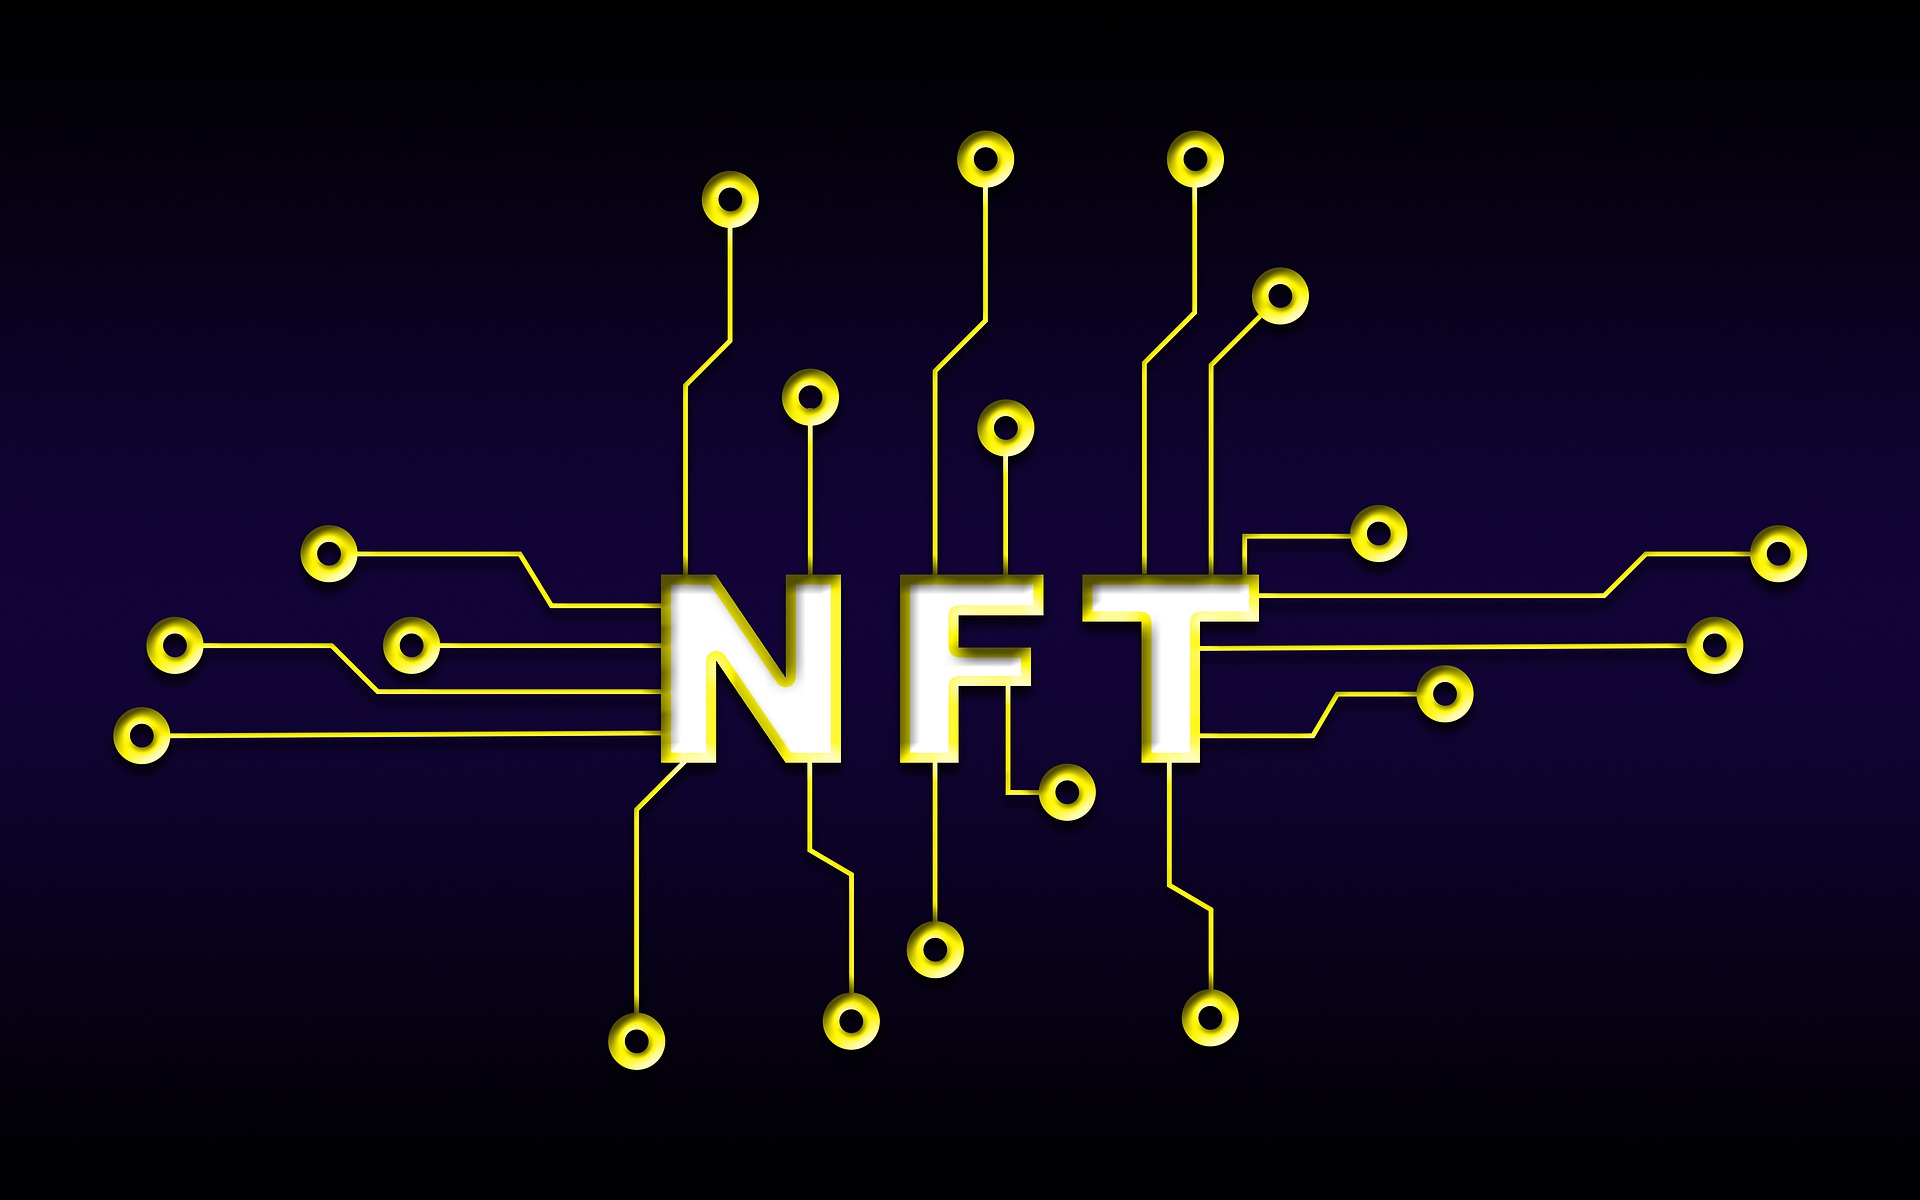 Google Trends Show Interest In NFT Overtook Crypto This Week